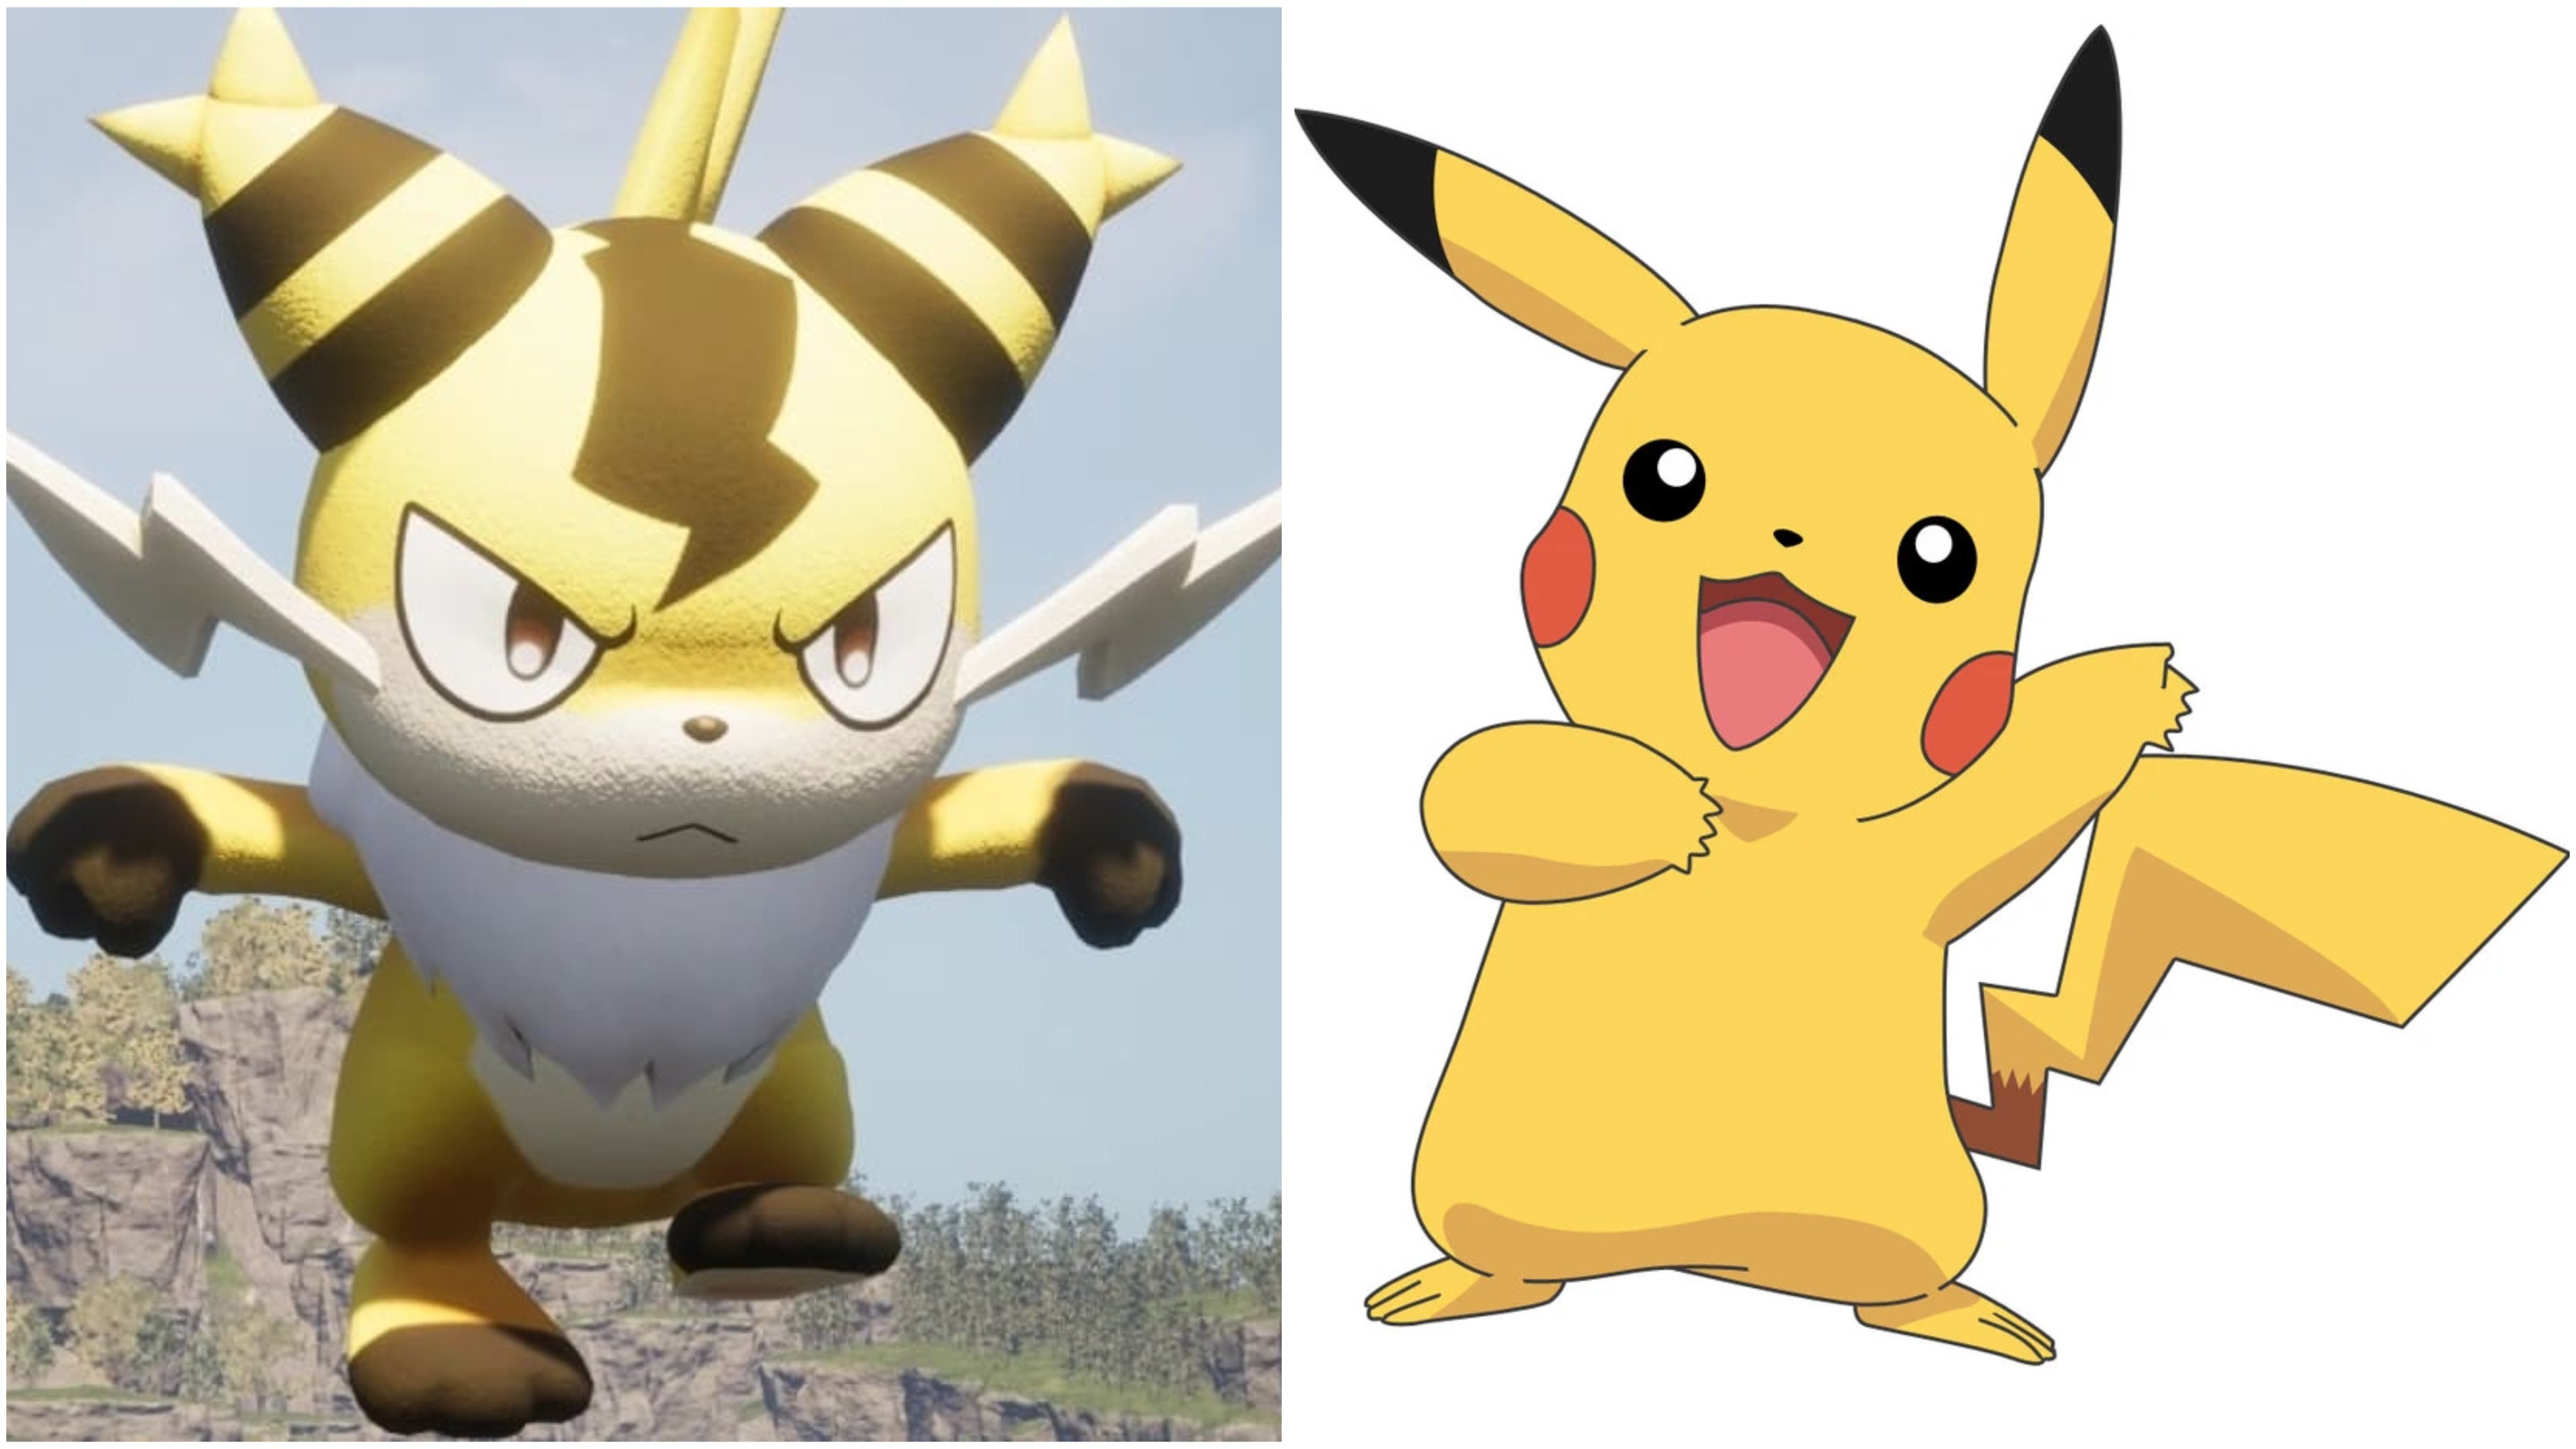 An image of the Palworld Pal Sparkit and the Pokemon Pikachu